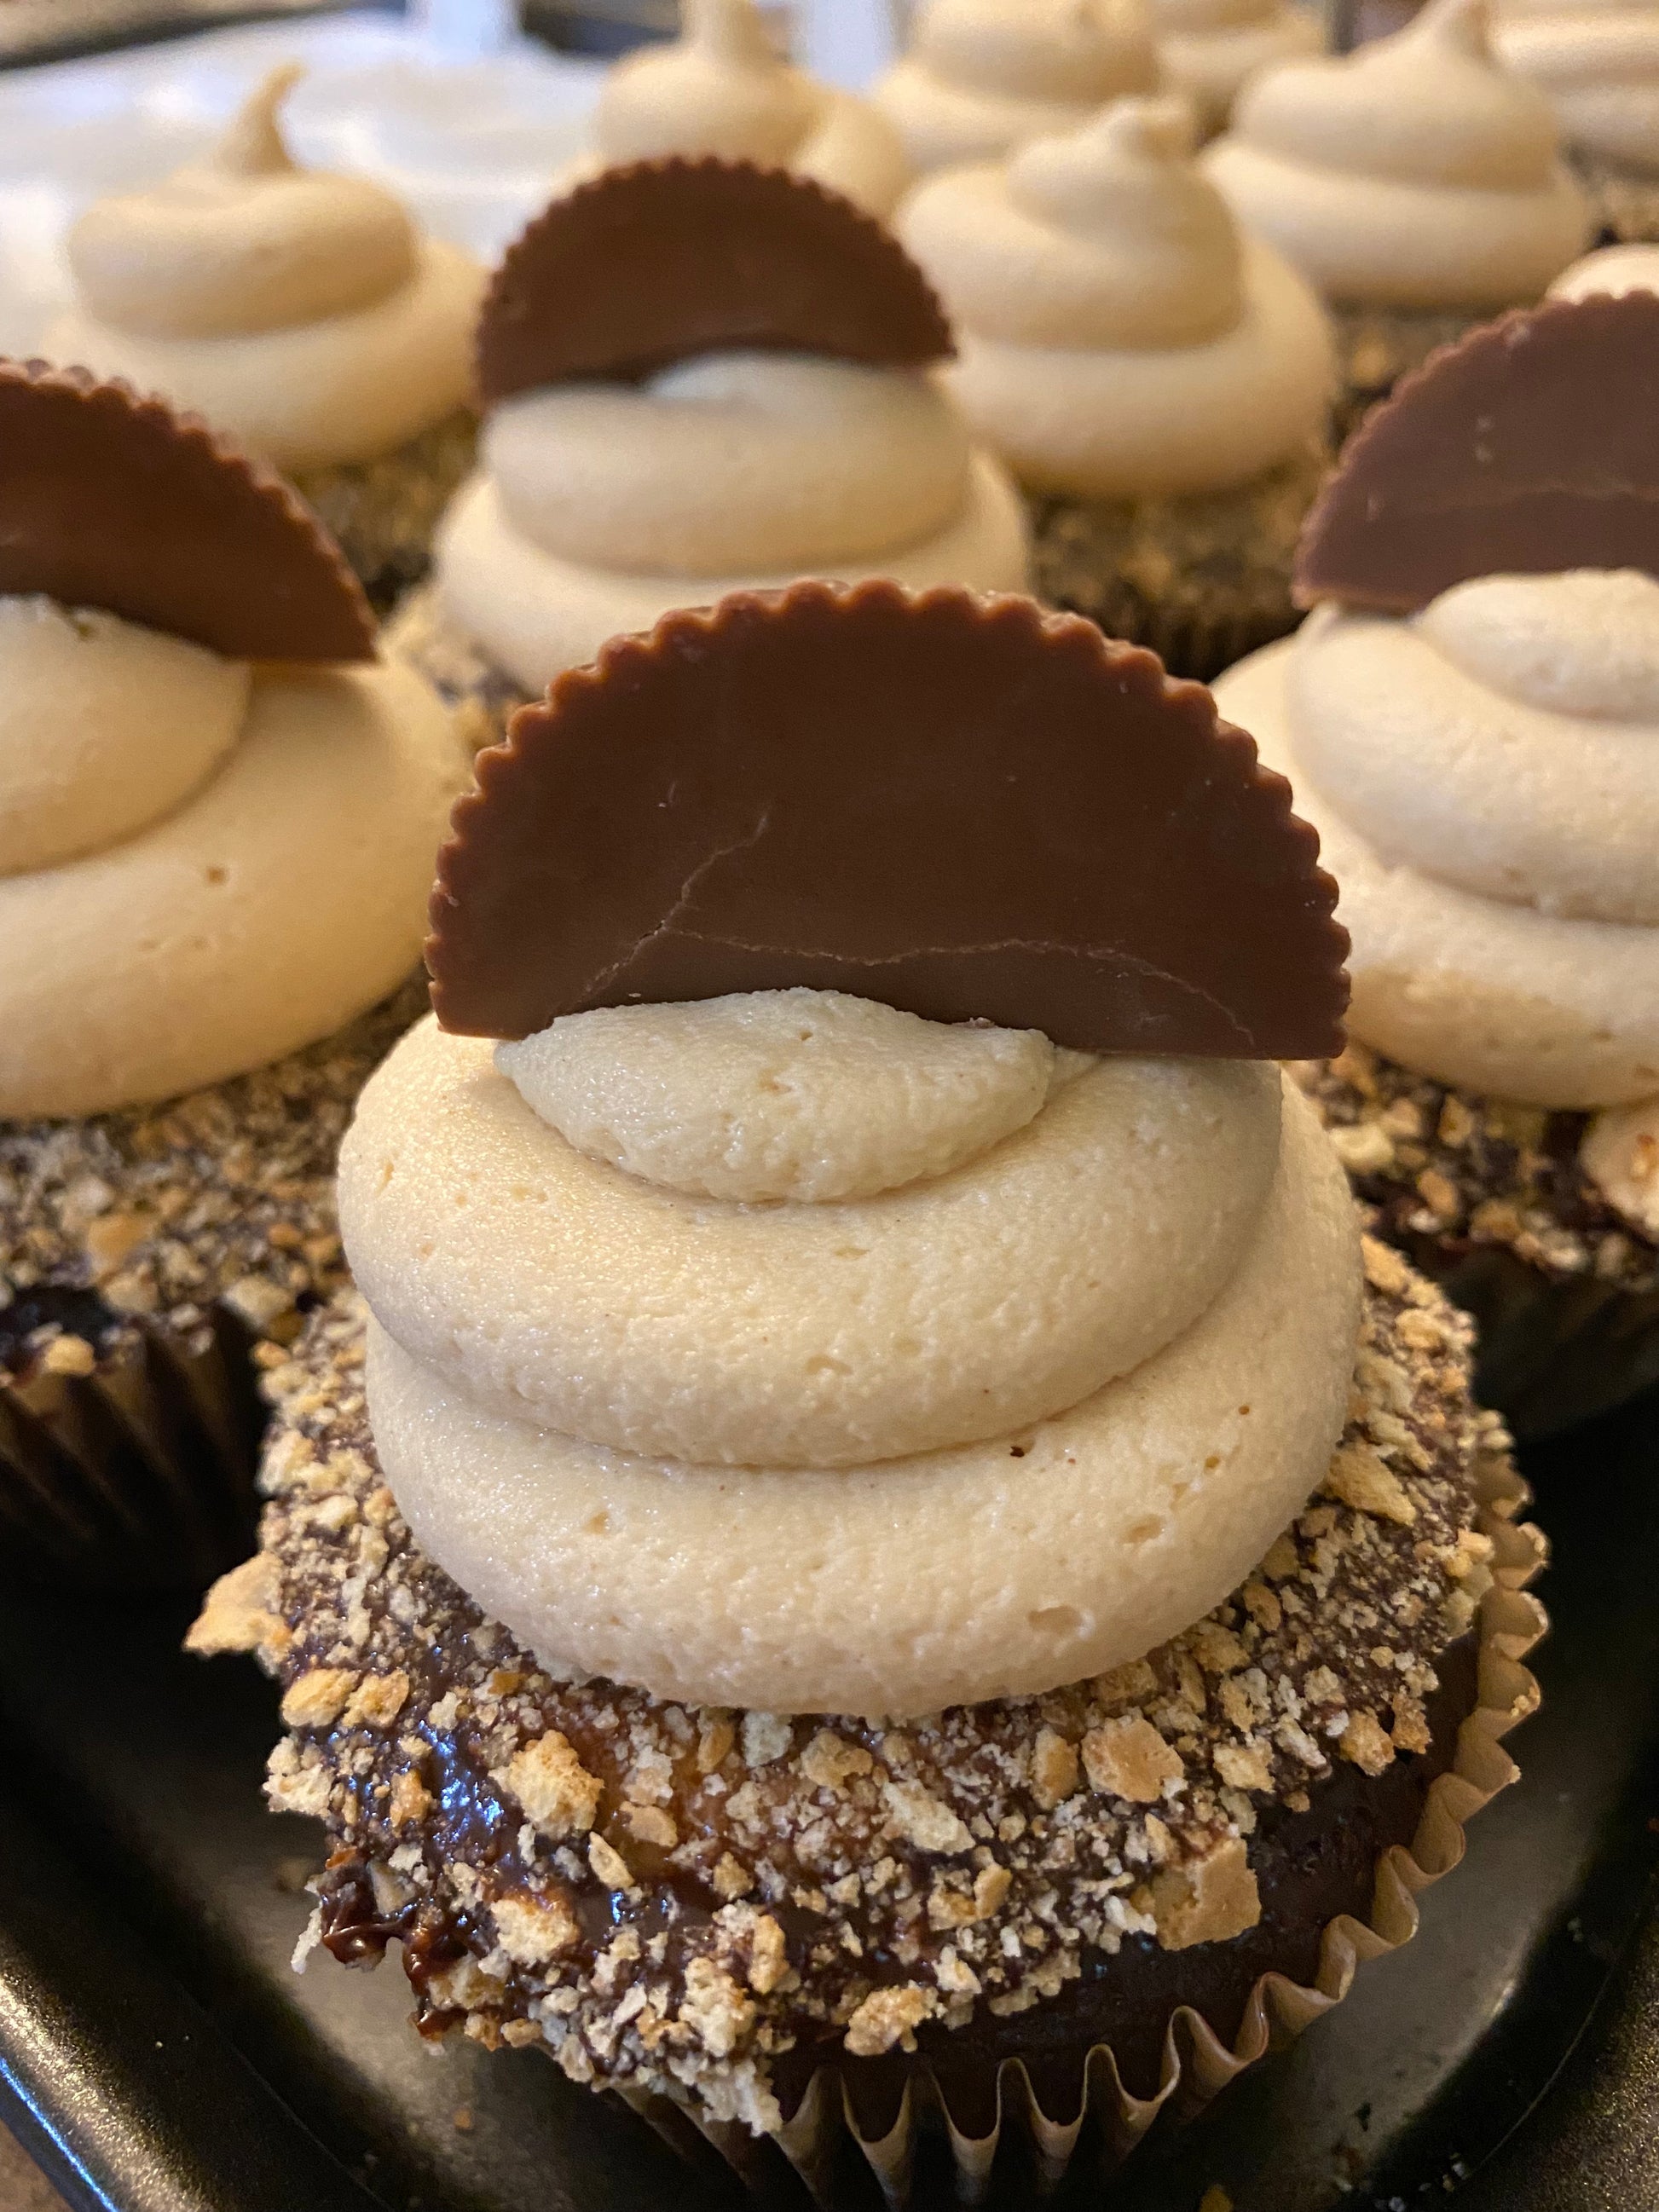 Peanut Butter Cheesecake - Mcks' Cupcakes in South Florida